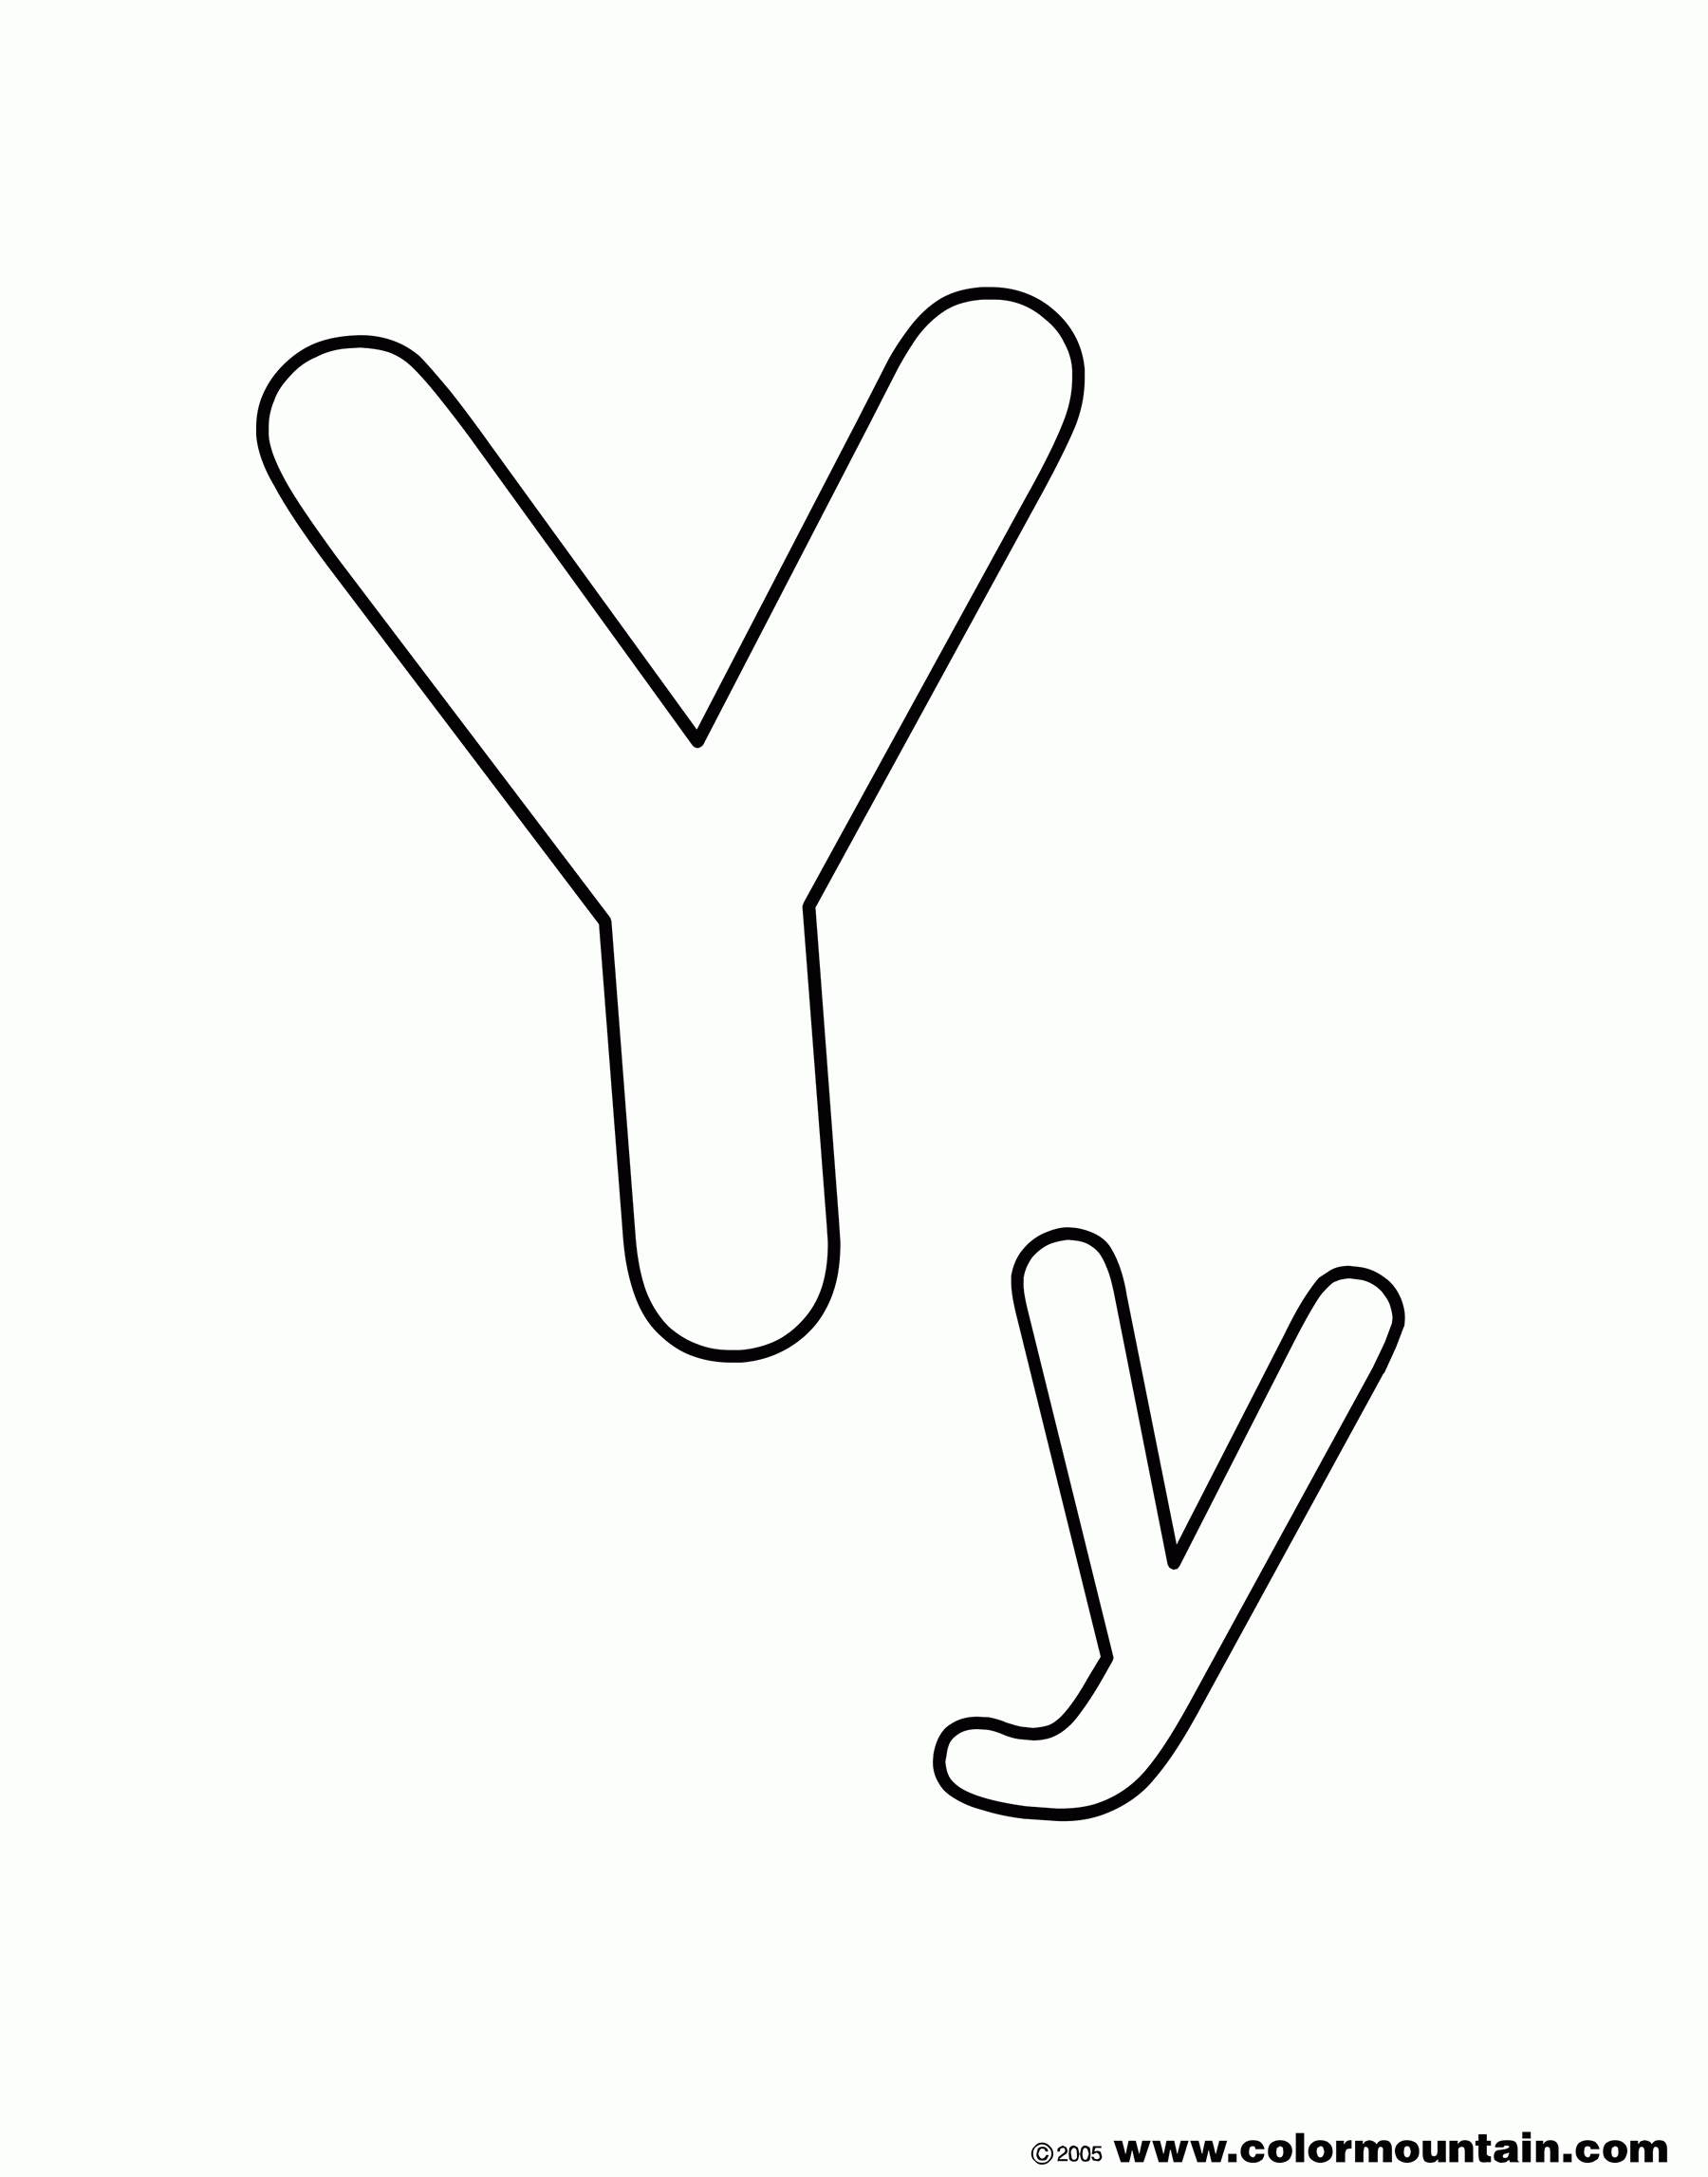 Geography Blog: Letter Y Coloring Pages